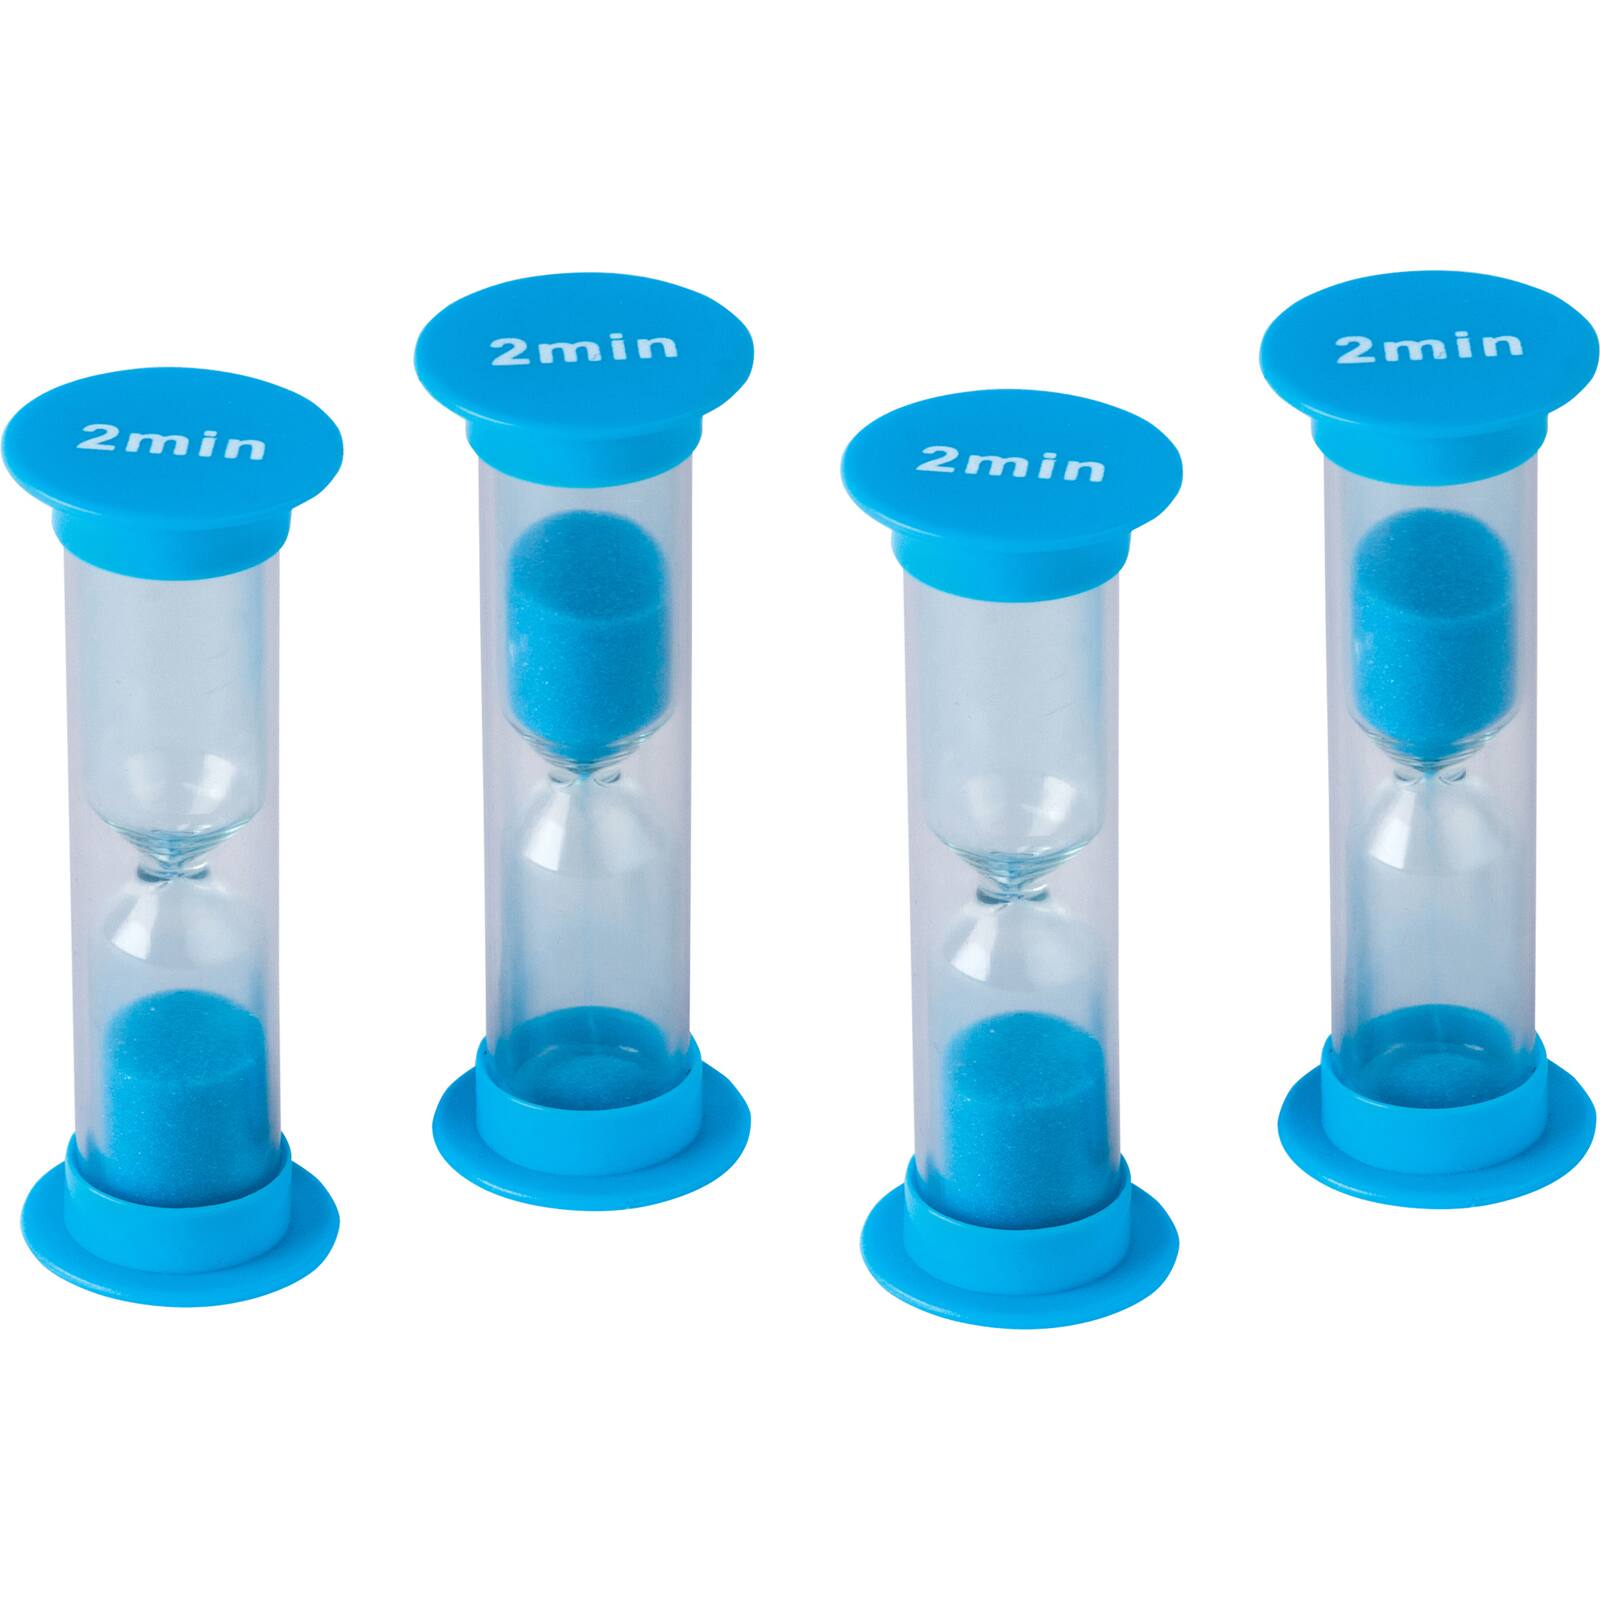 Teacher Created Resources Mini 2 Minute Sand Timers, 6 packs of 4